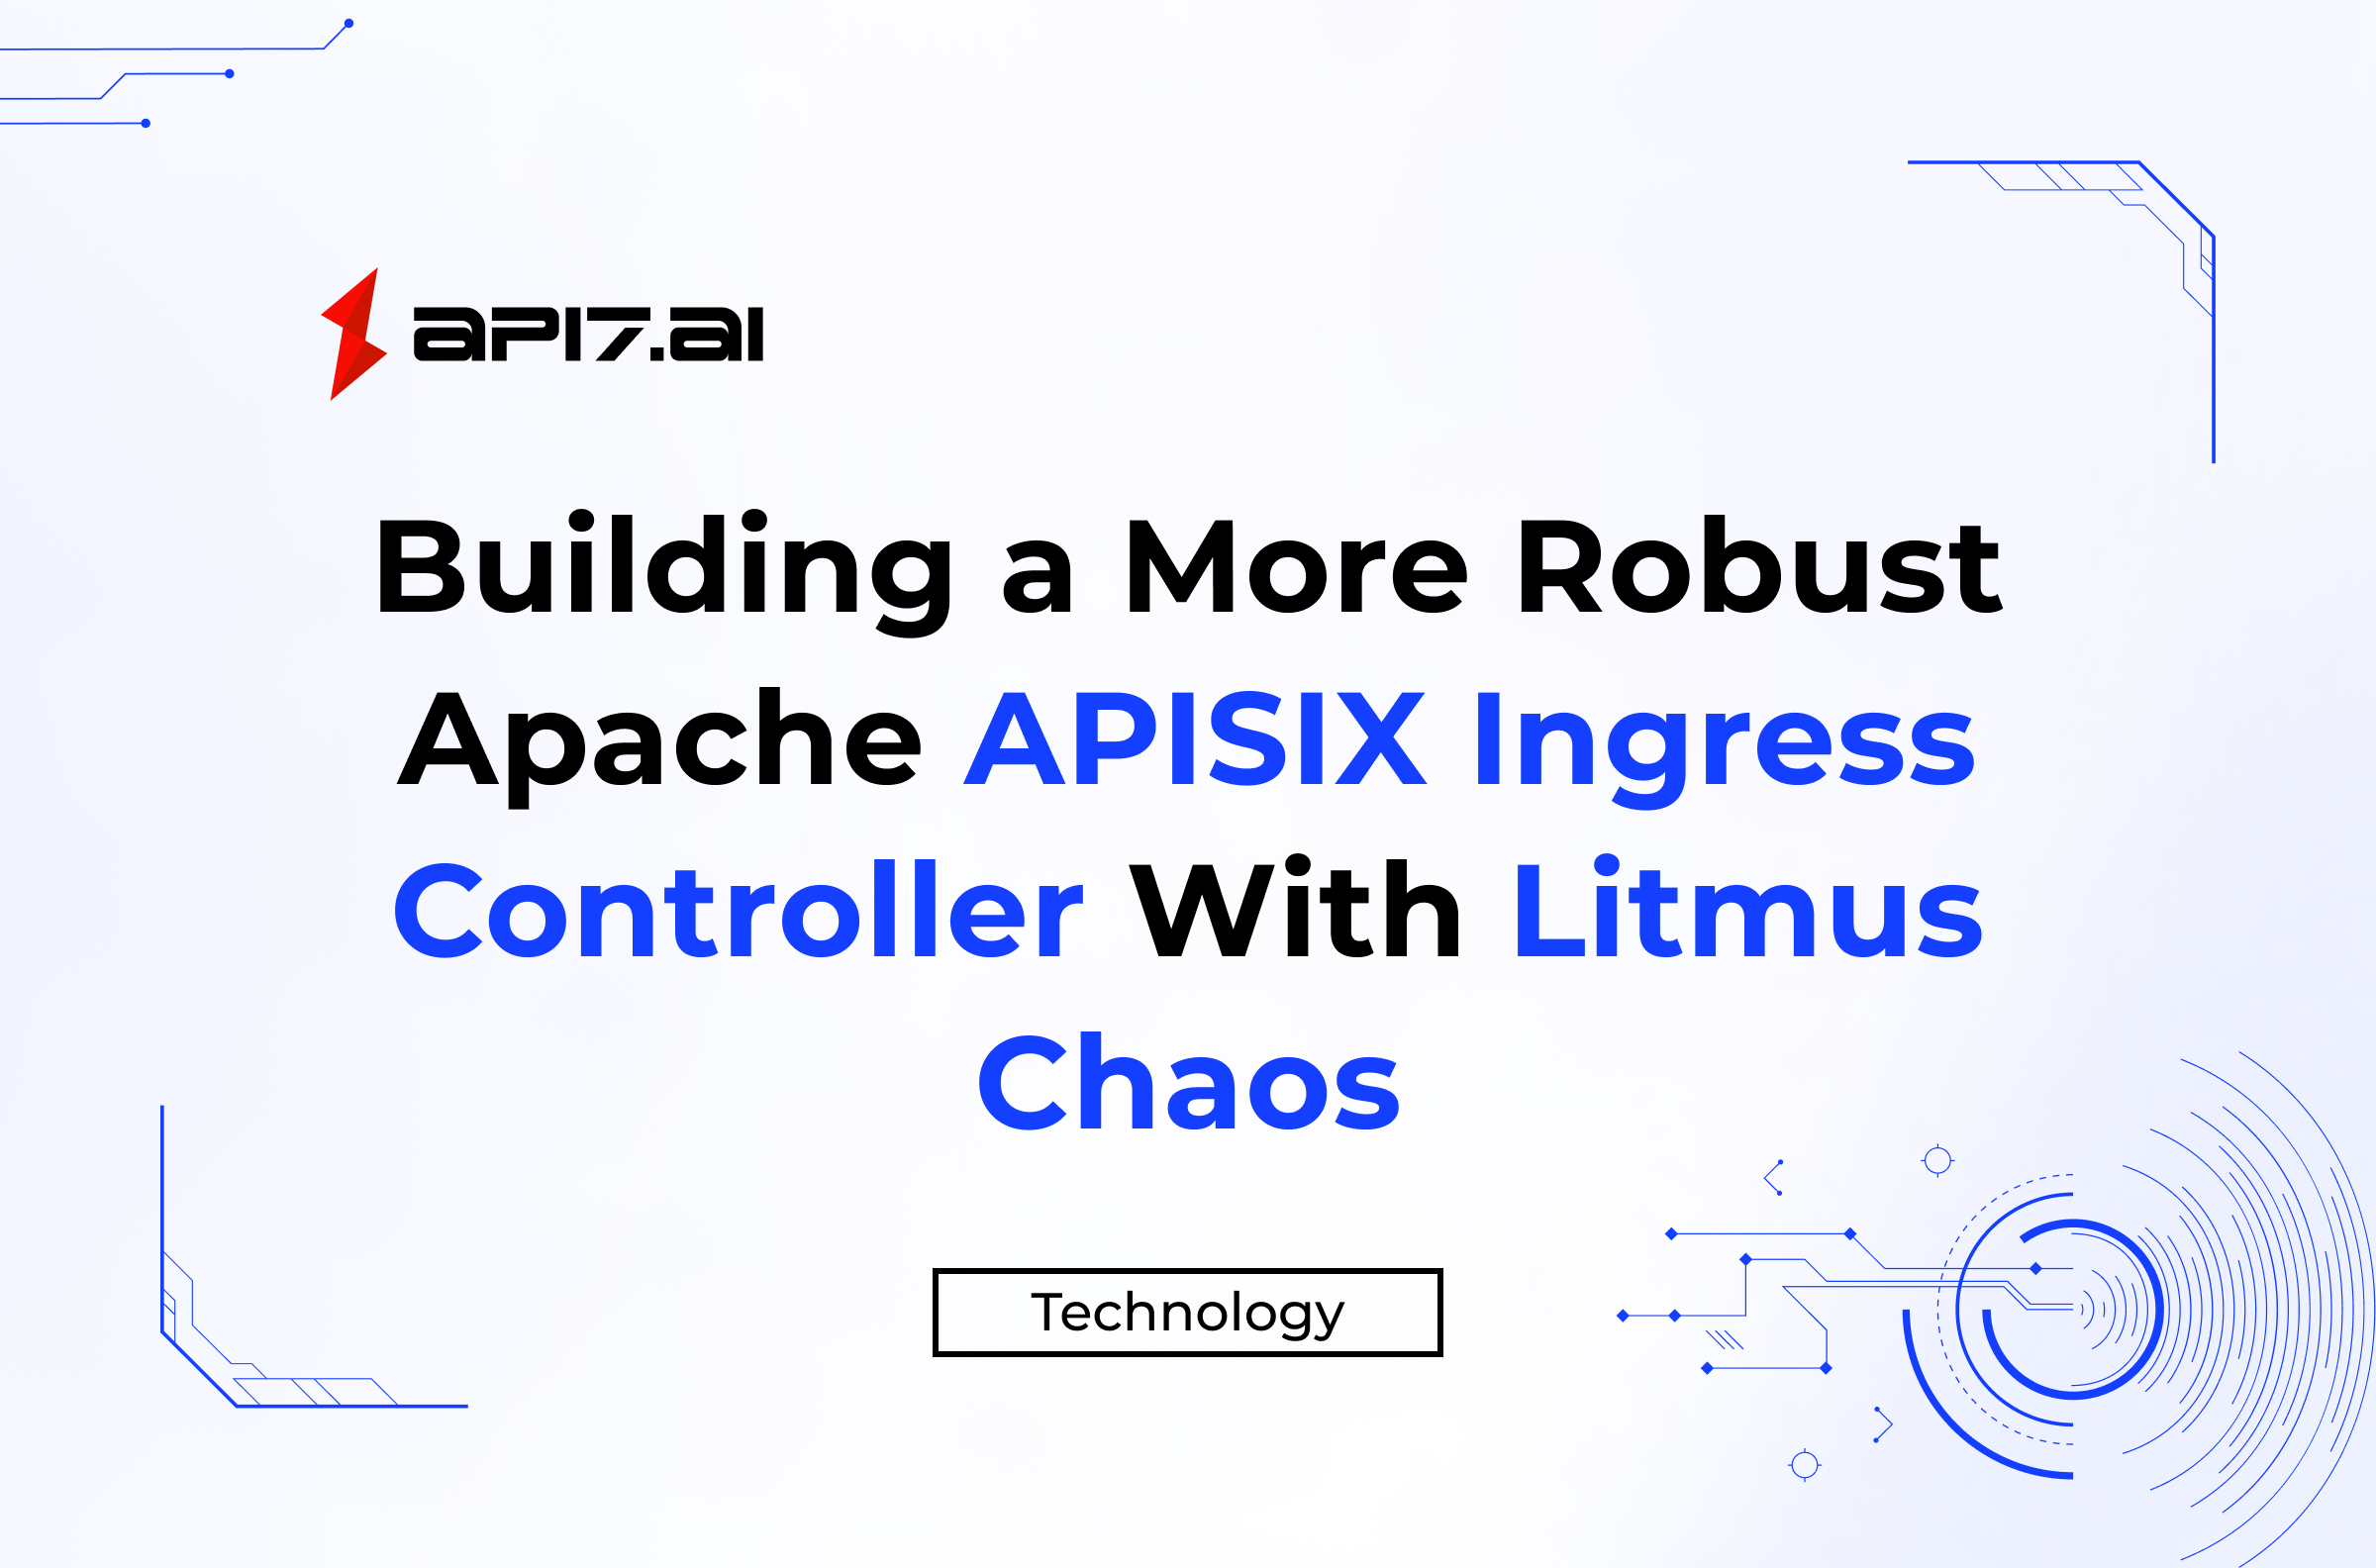 Building a More Robust Apache APISIX Ingress Controller With Litmus Chaos